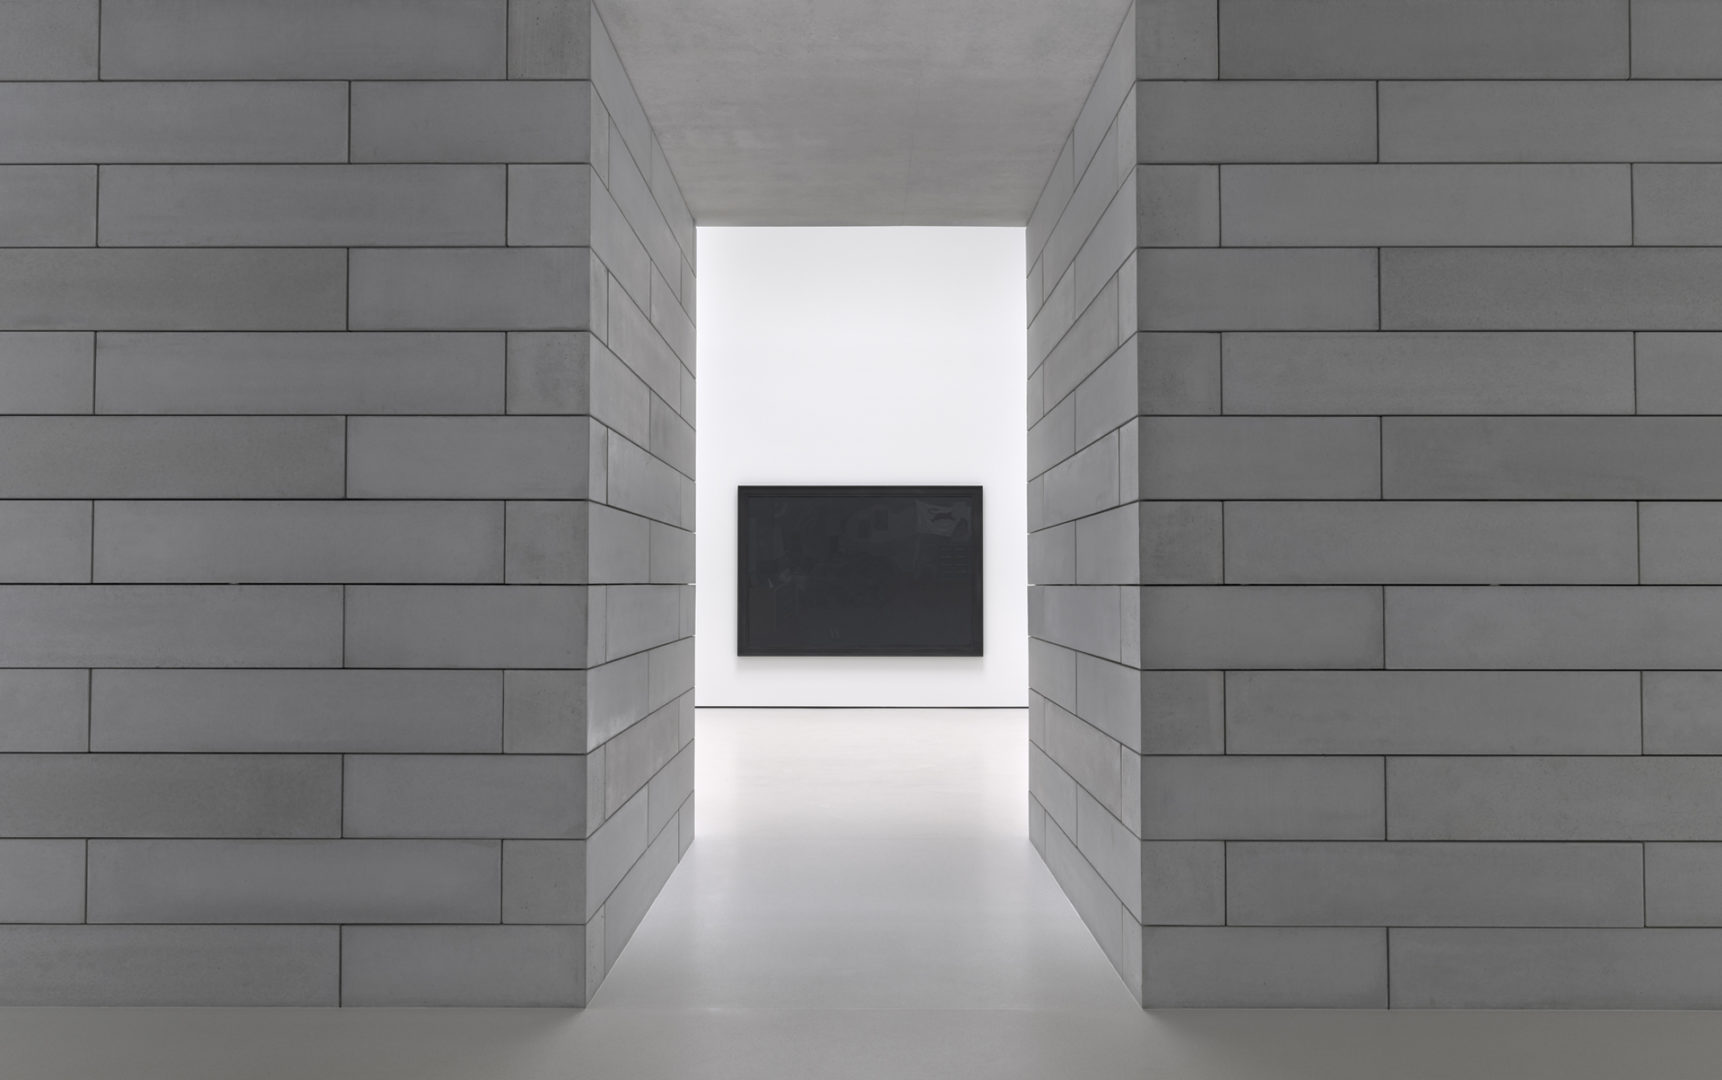 A black painting is centered, visible through a doorway framed by gray concrete blocks.